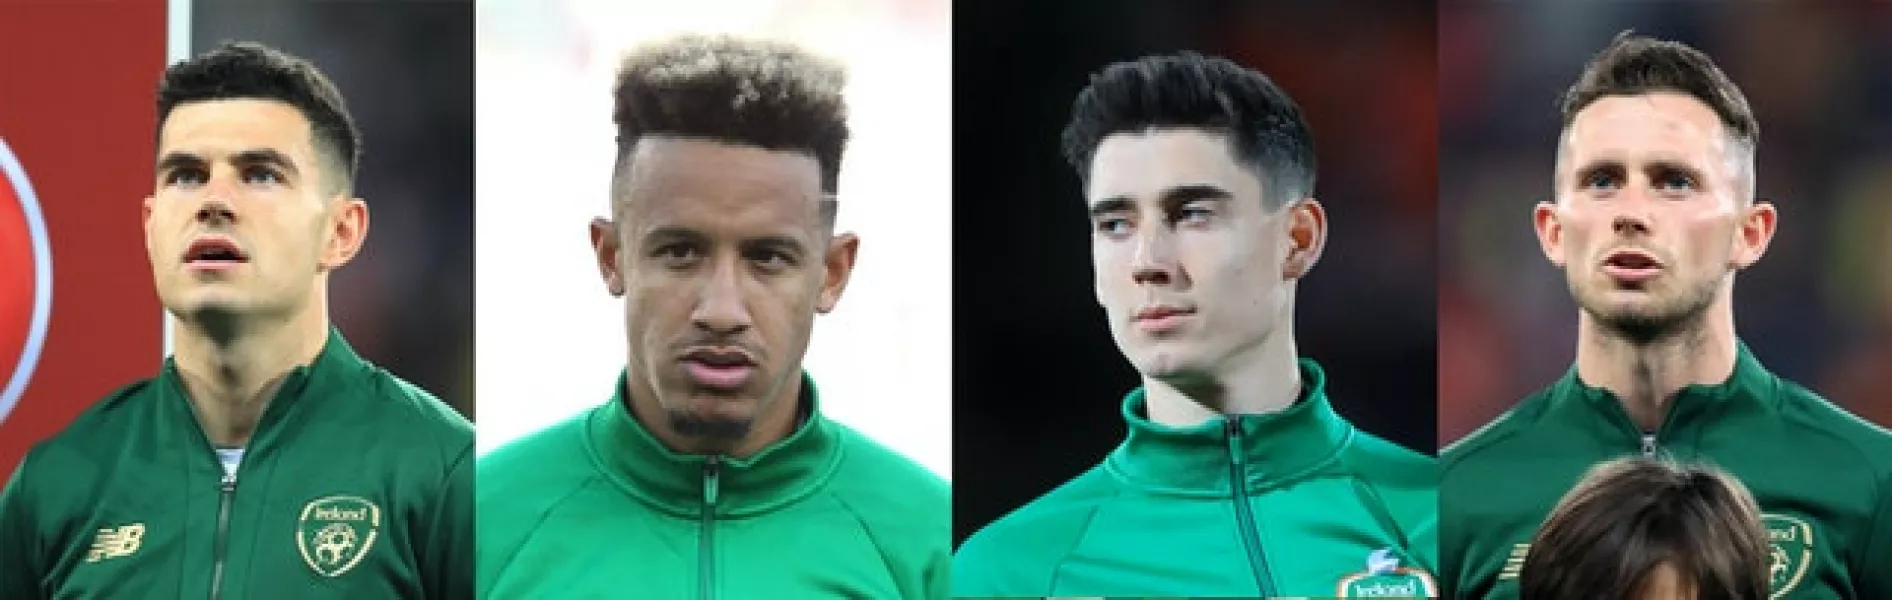 John Egan, Callum Robinson, Callum O’Dowda and Alan Browne missed out against Wales due to coronavirus restrictions (PA)